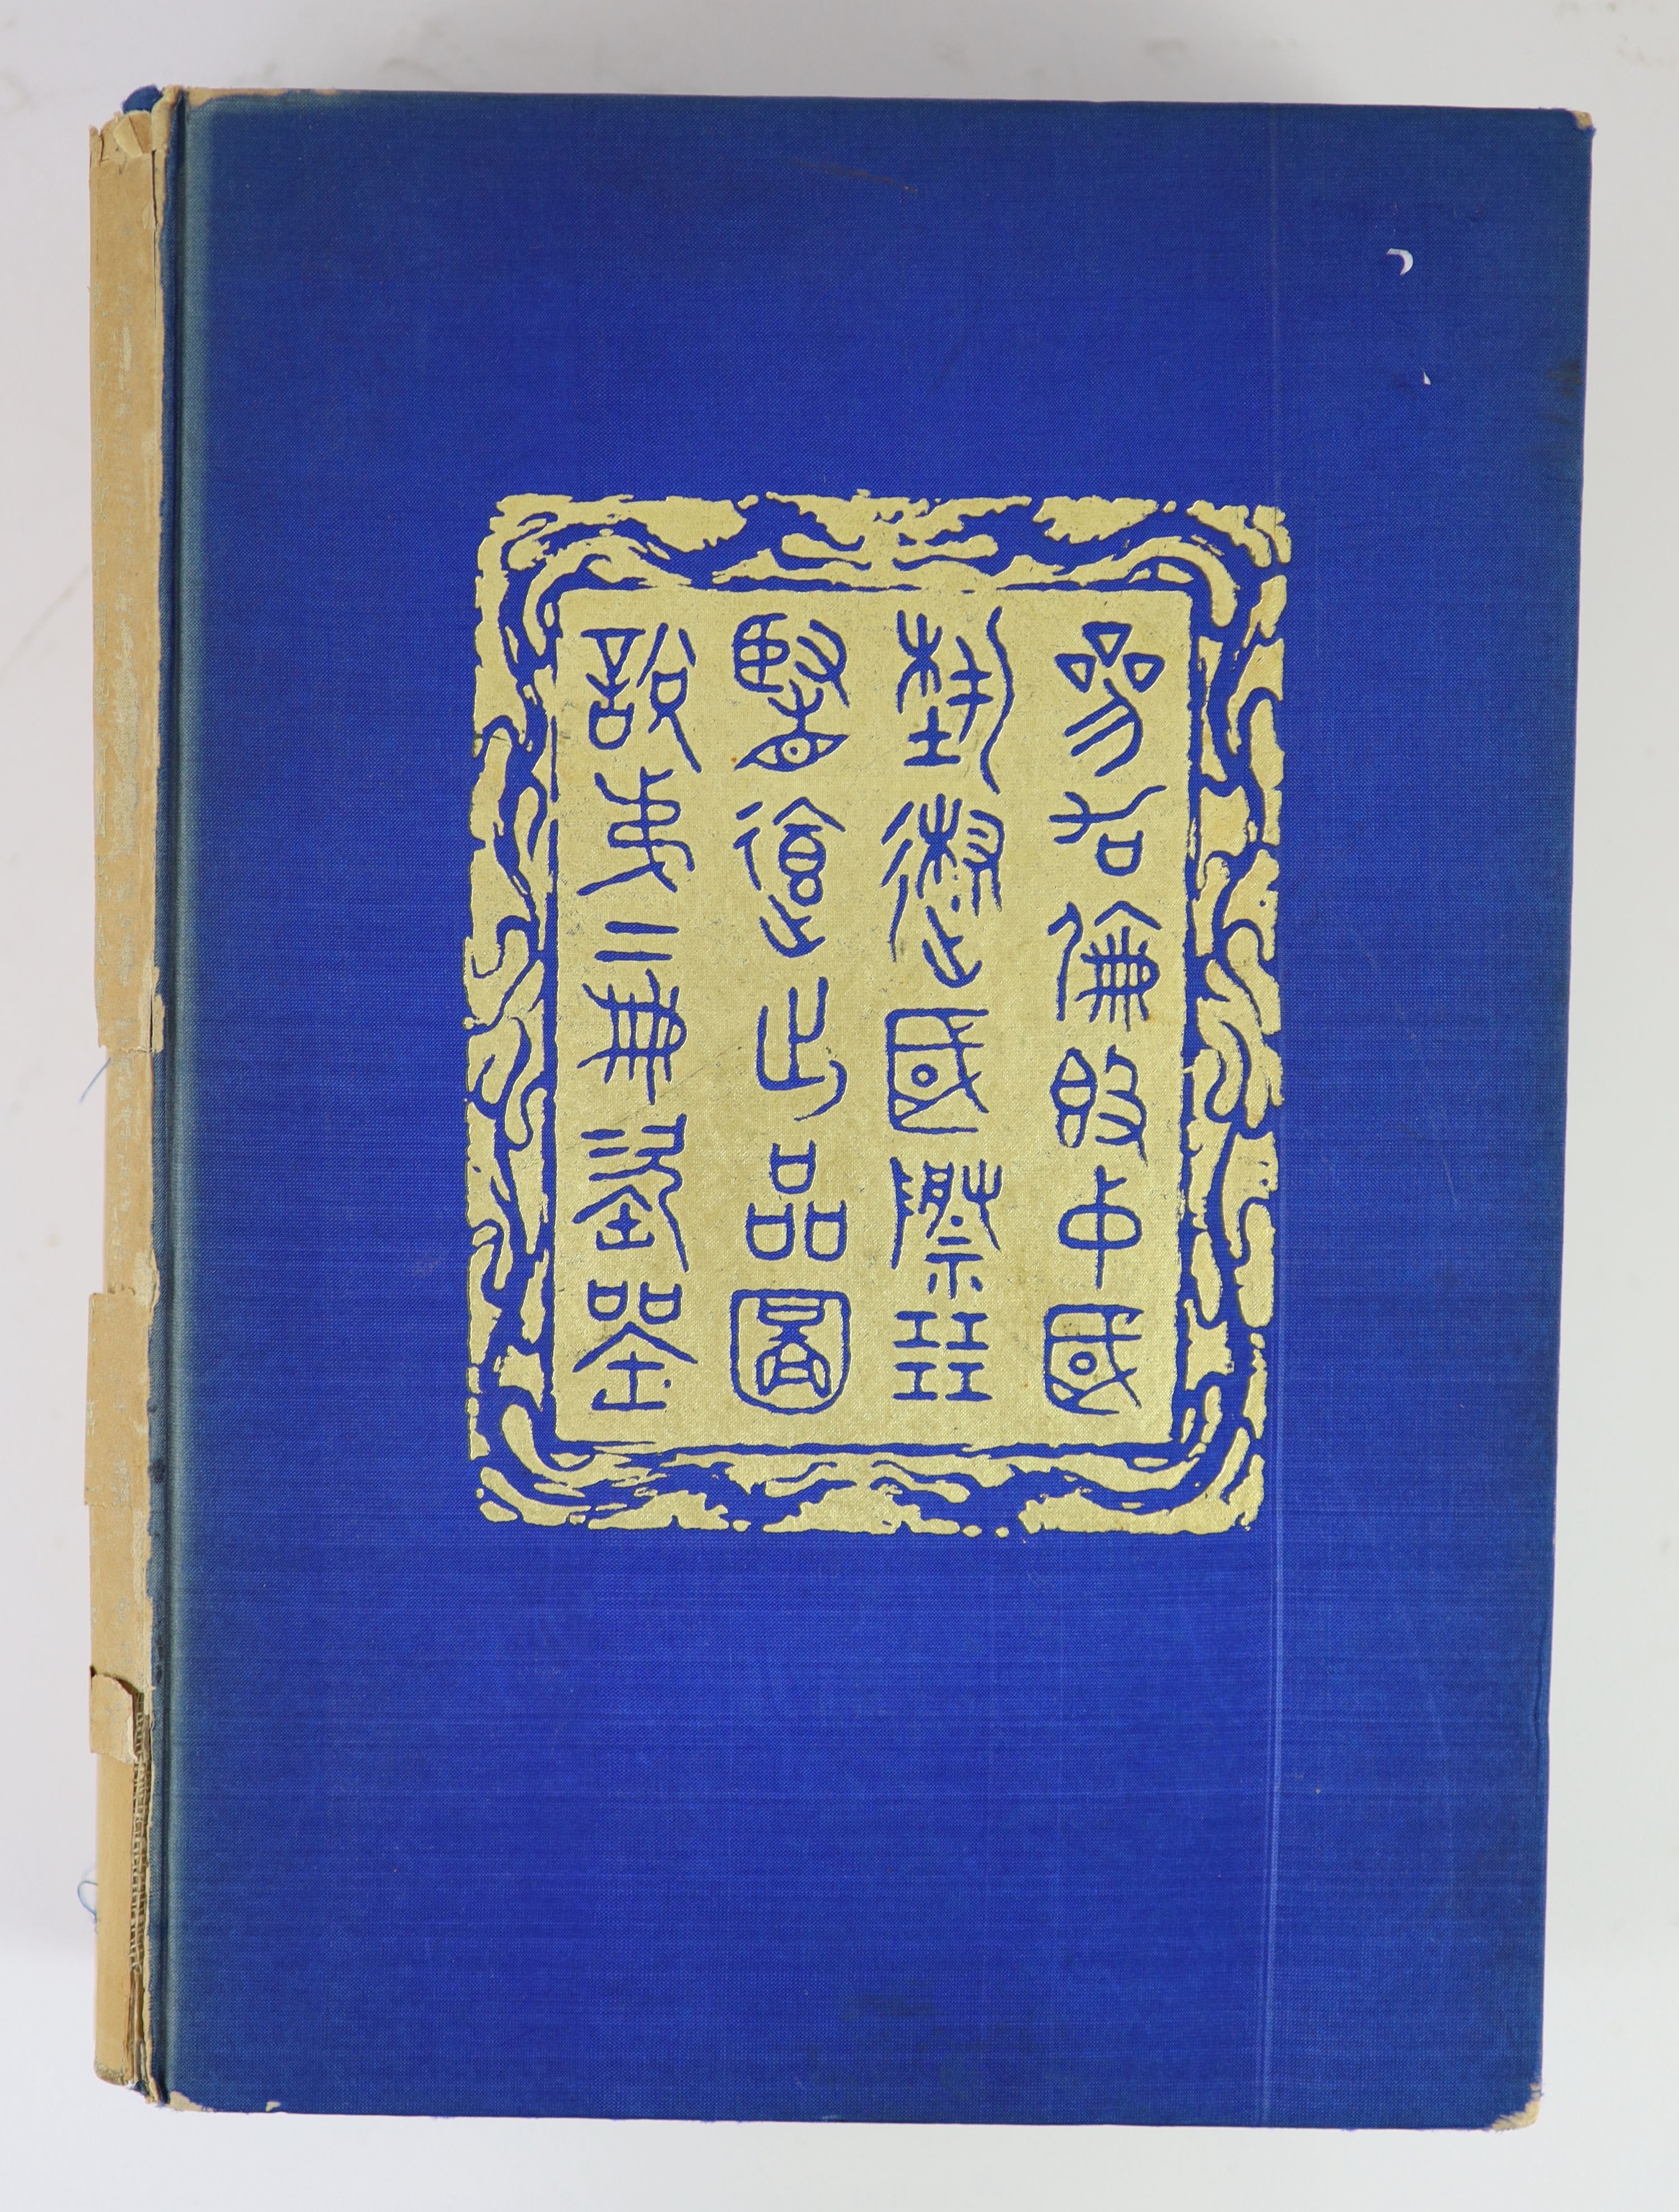 Illustrated catalogue of Chinese Government Exhibits For the International Exhibition of Chinese Art in London, 1935, four volumes, 27 x 19.5 cm